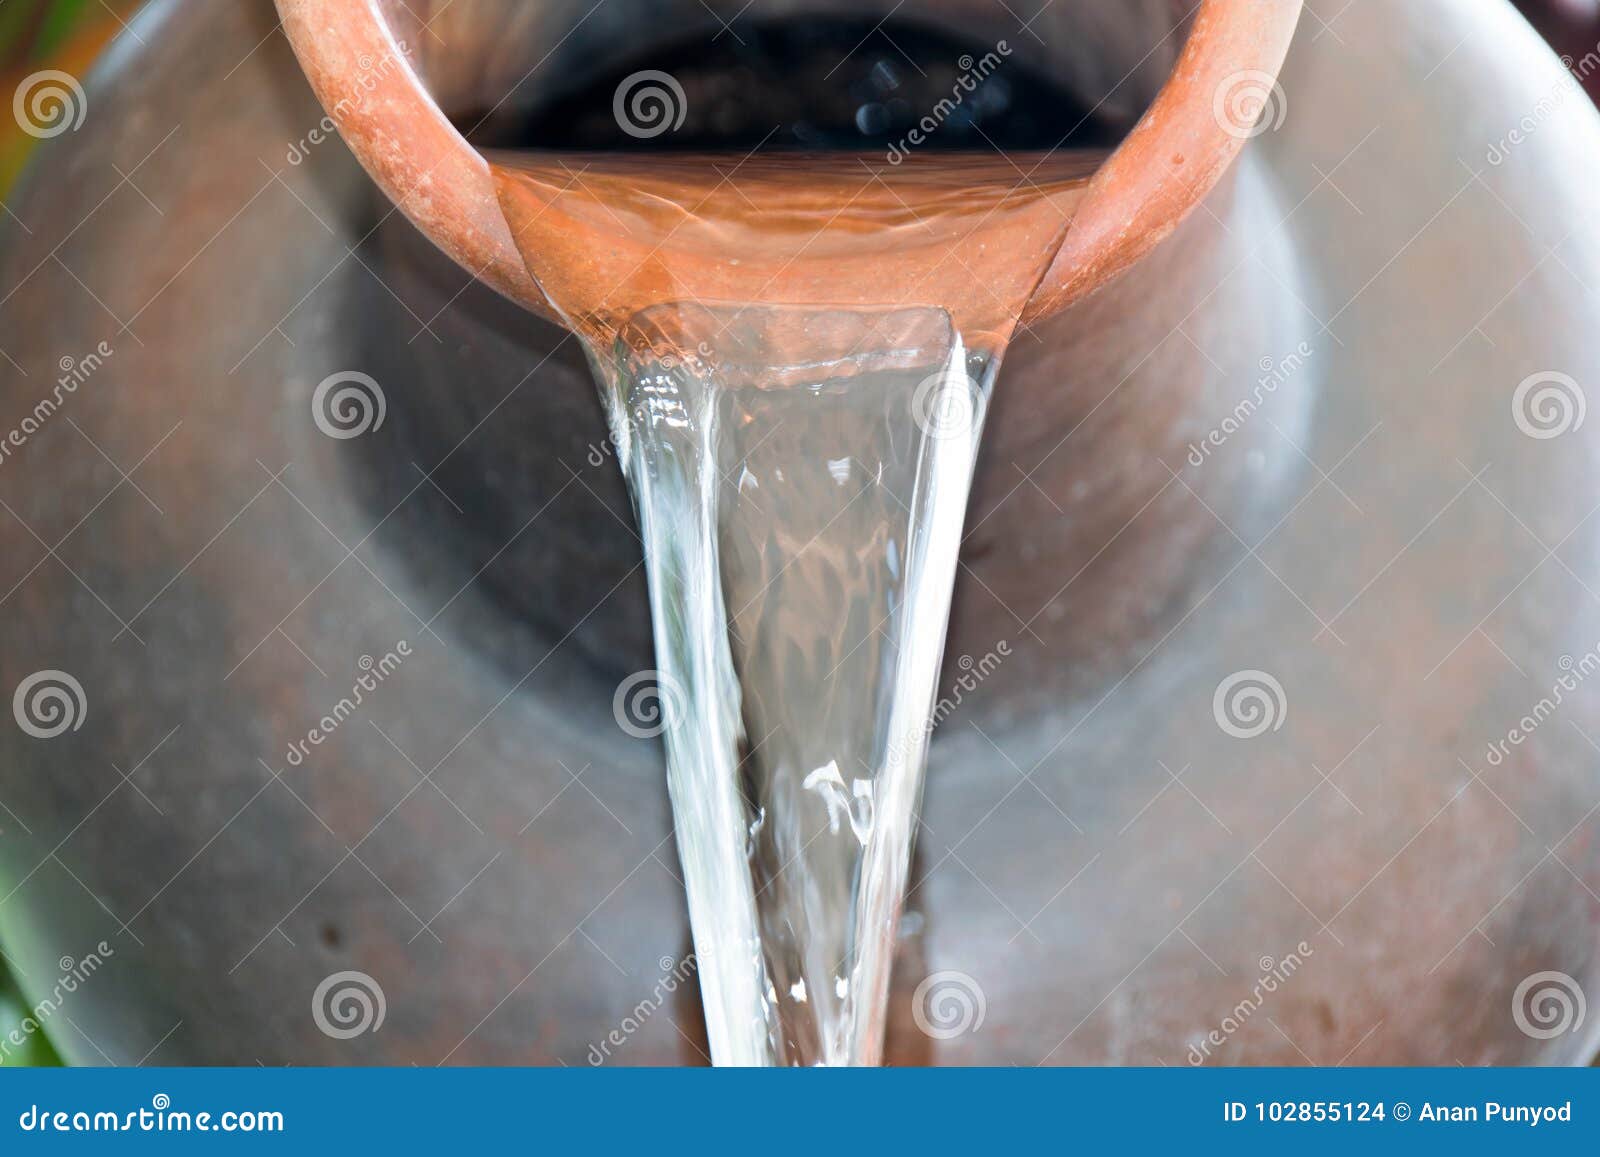 close up pour water out of terracotta pots.